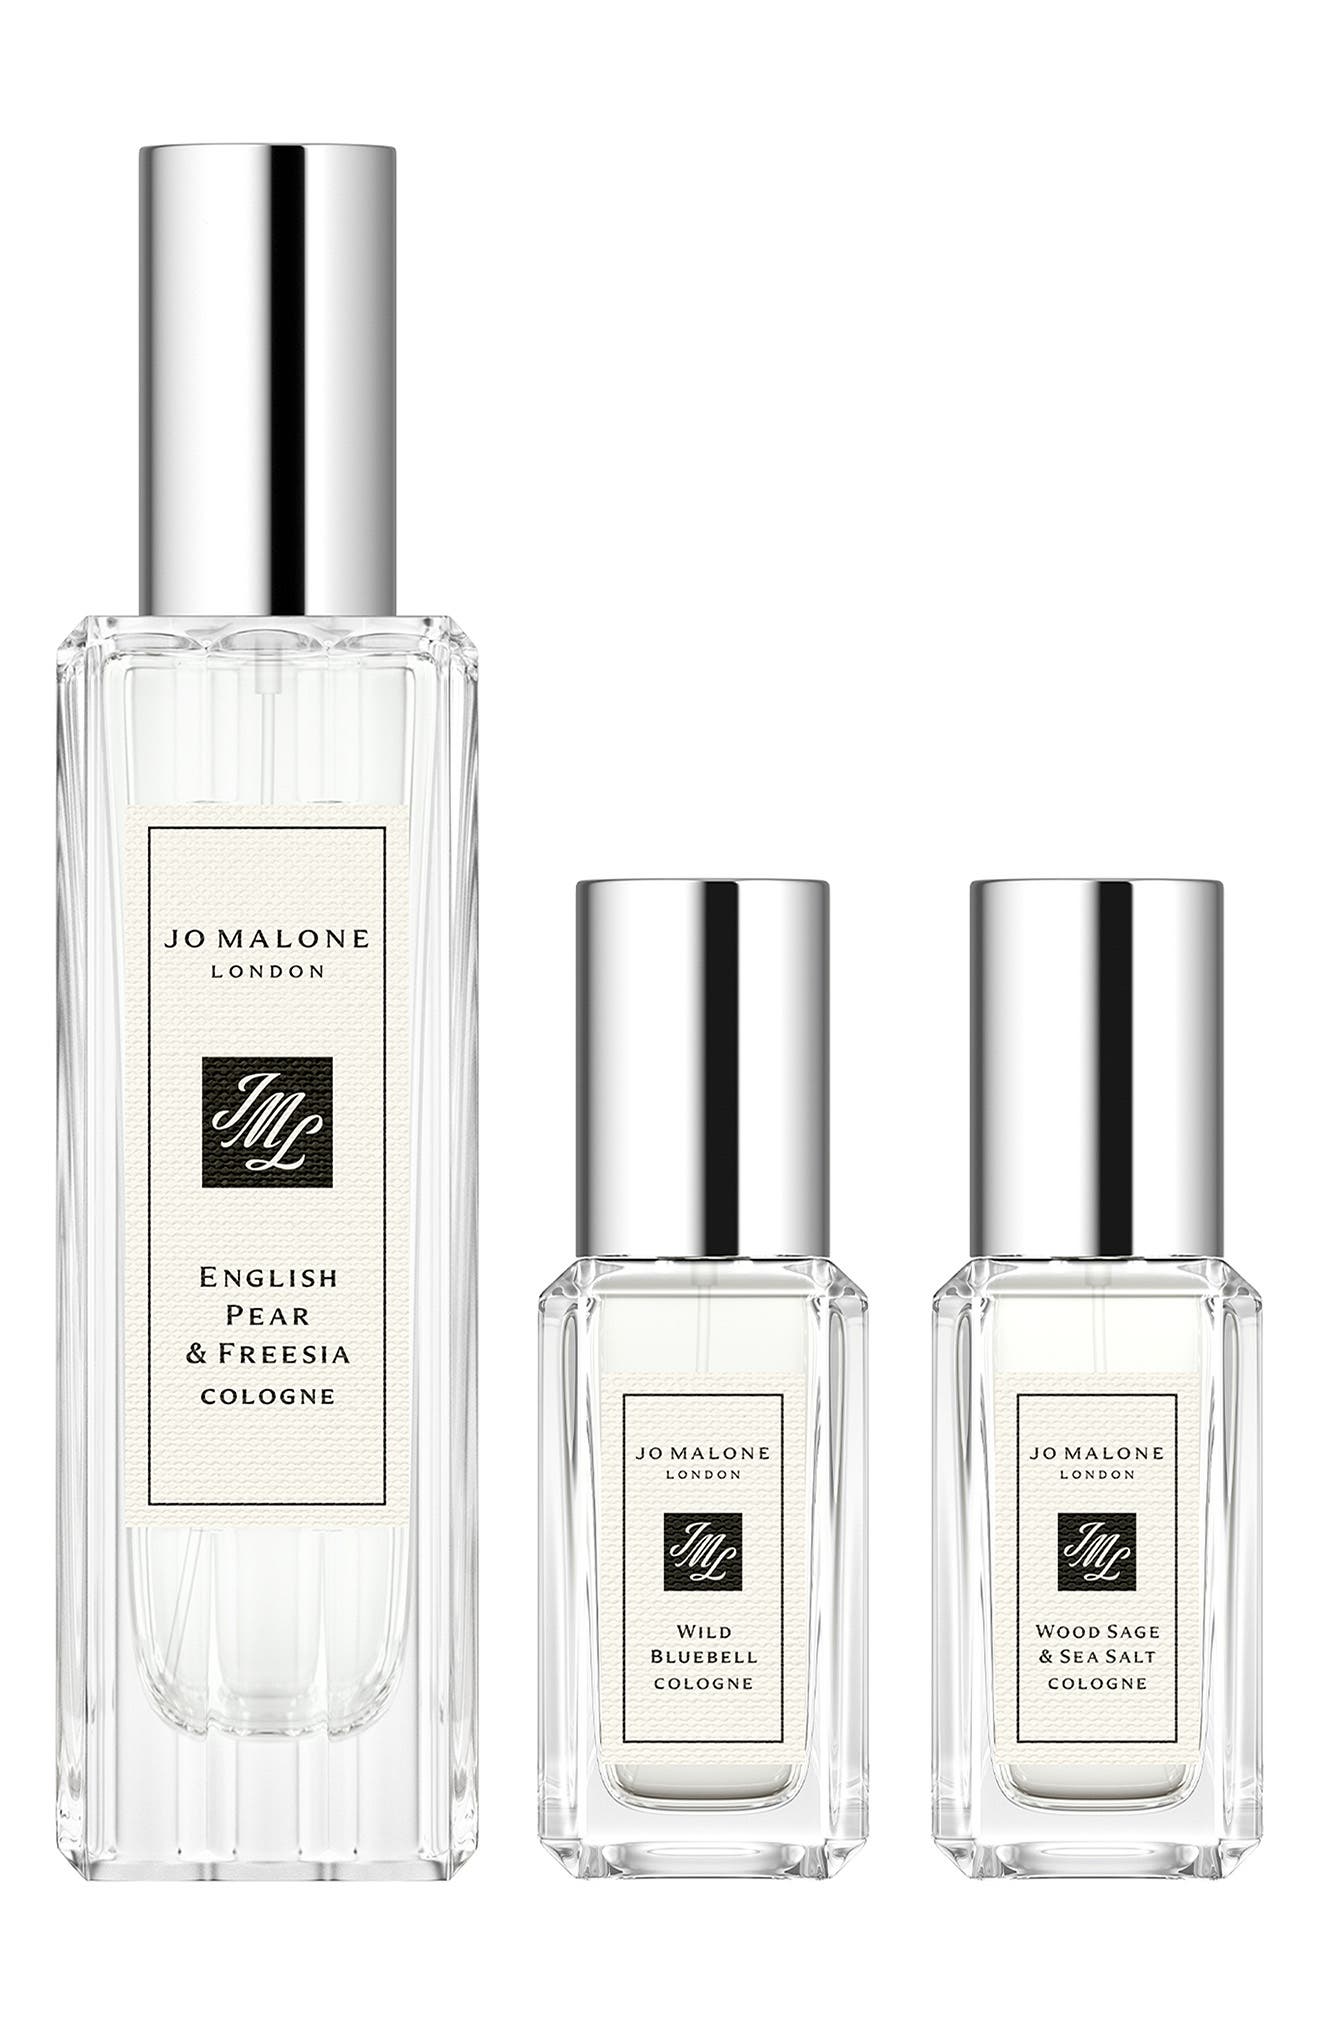 Jo Malone LondonTM Jo Malone London(TM) English Pear & Freesia Cologne Collection at Nordstrom